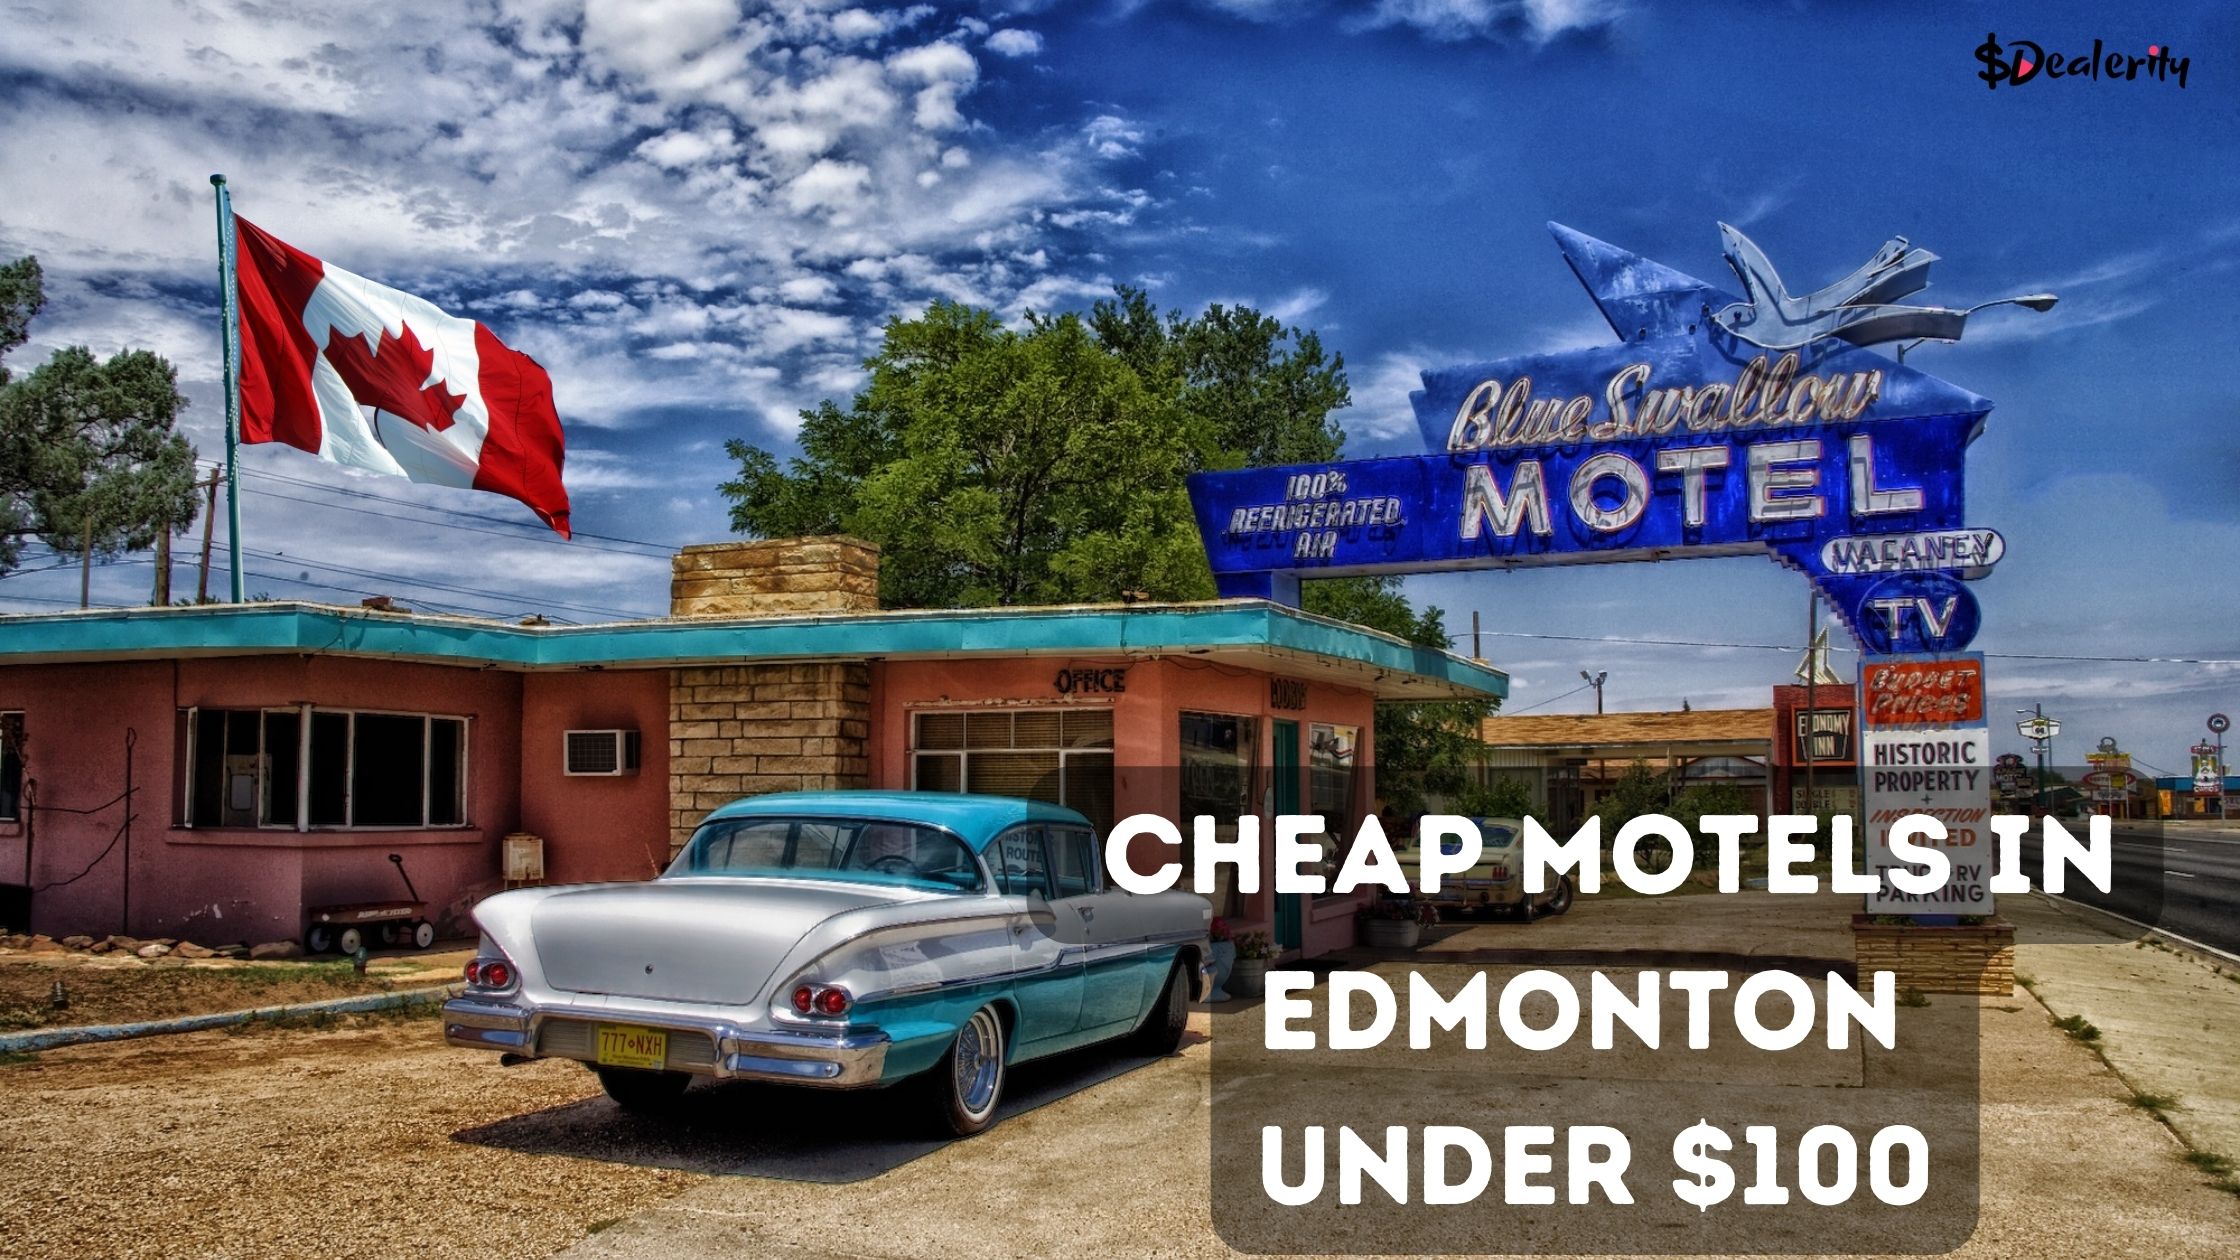 Discover Cheap Motels in Edmonton Under $100 for Your Budget Stay